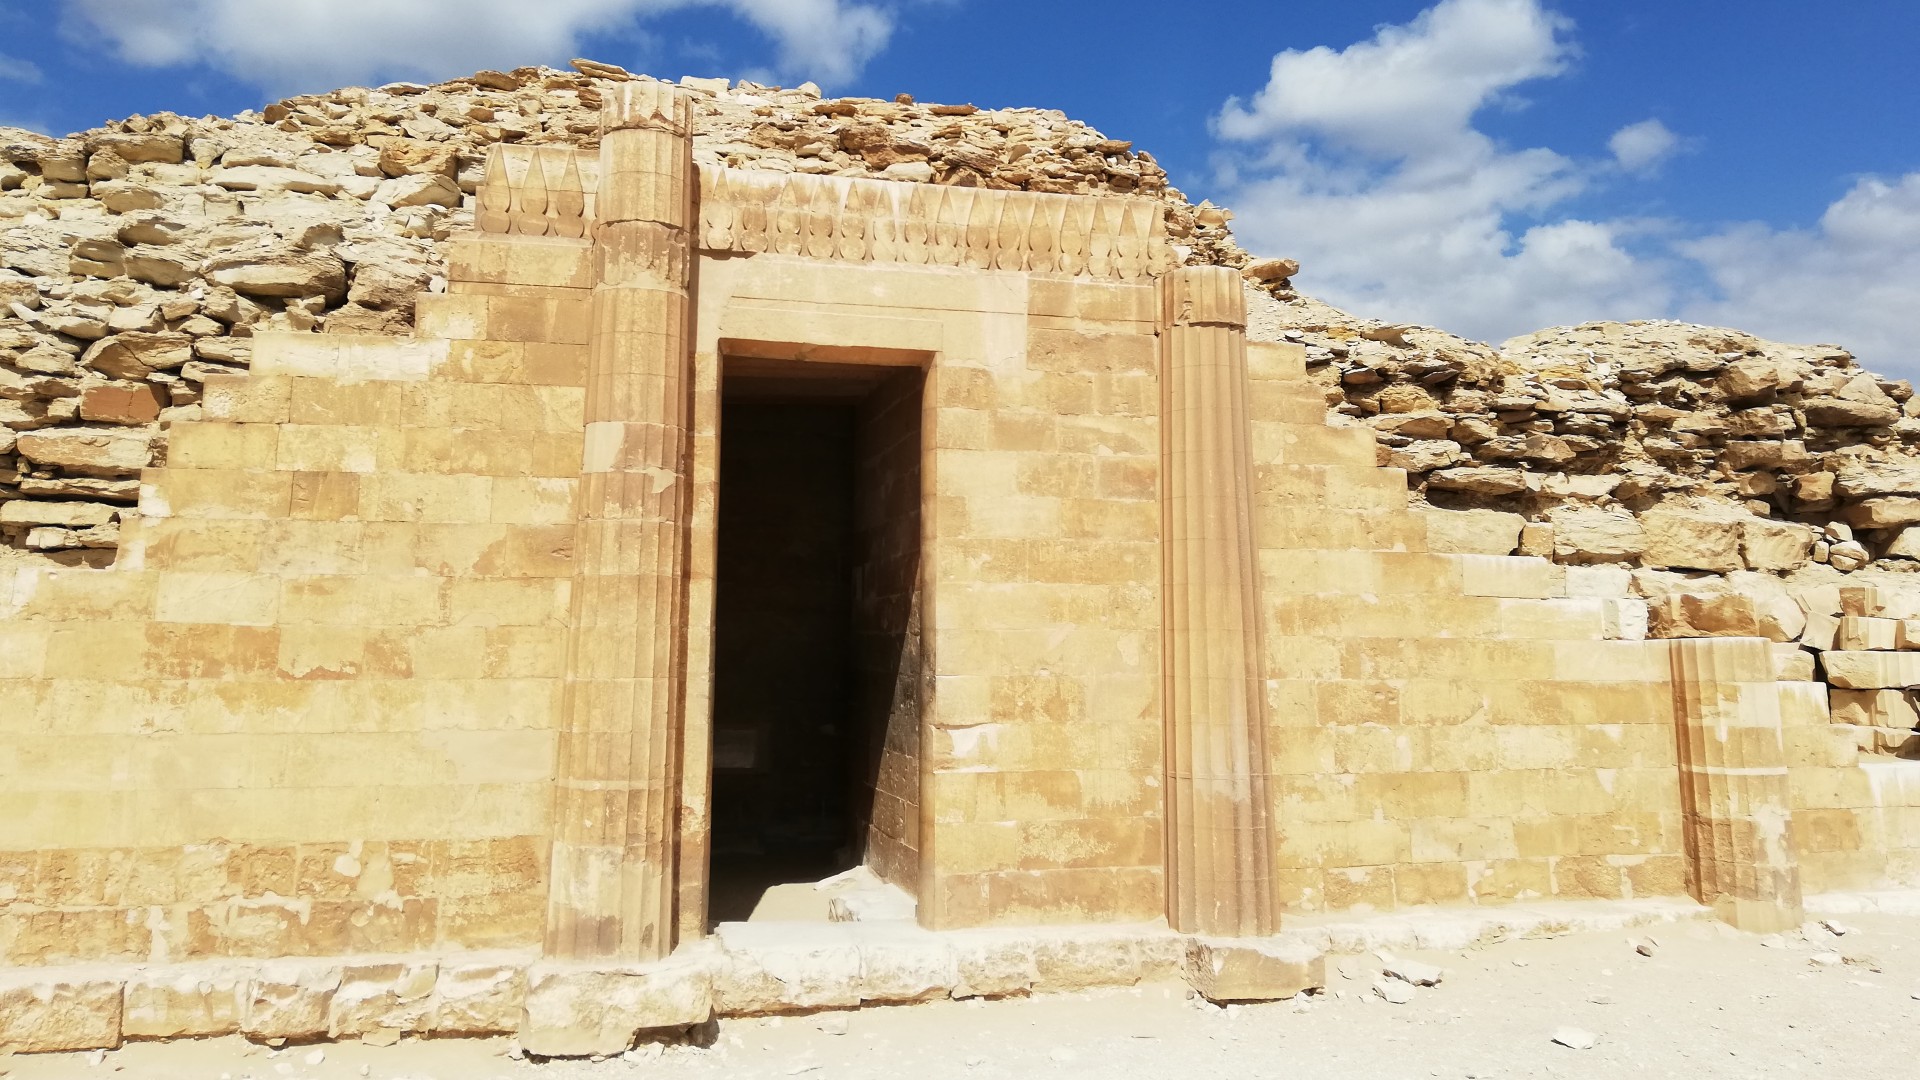 Here we see the pavilion at the funerary complex of pharaoh Djoser located in Saqqara, Egypt. We can see a doorway flanked by 2 tall columns. While there is mostly smooth bricks, at the top the bricks looked piled on more haphazardly and less neat.